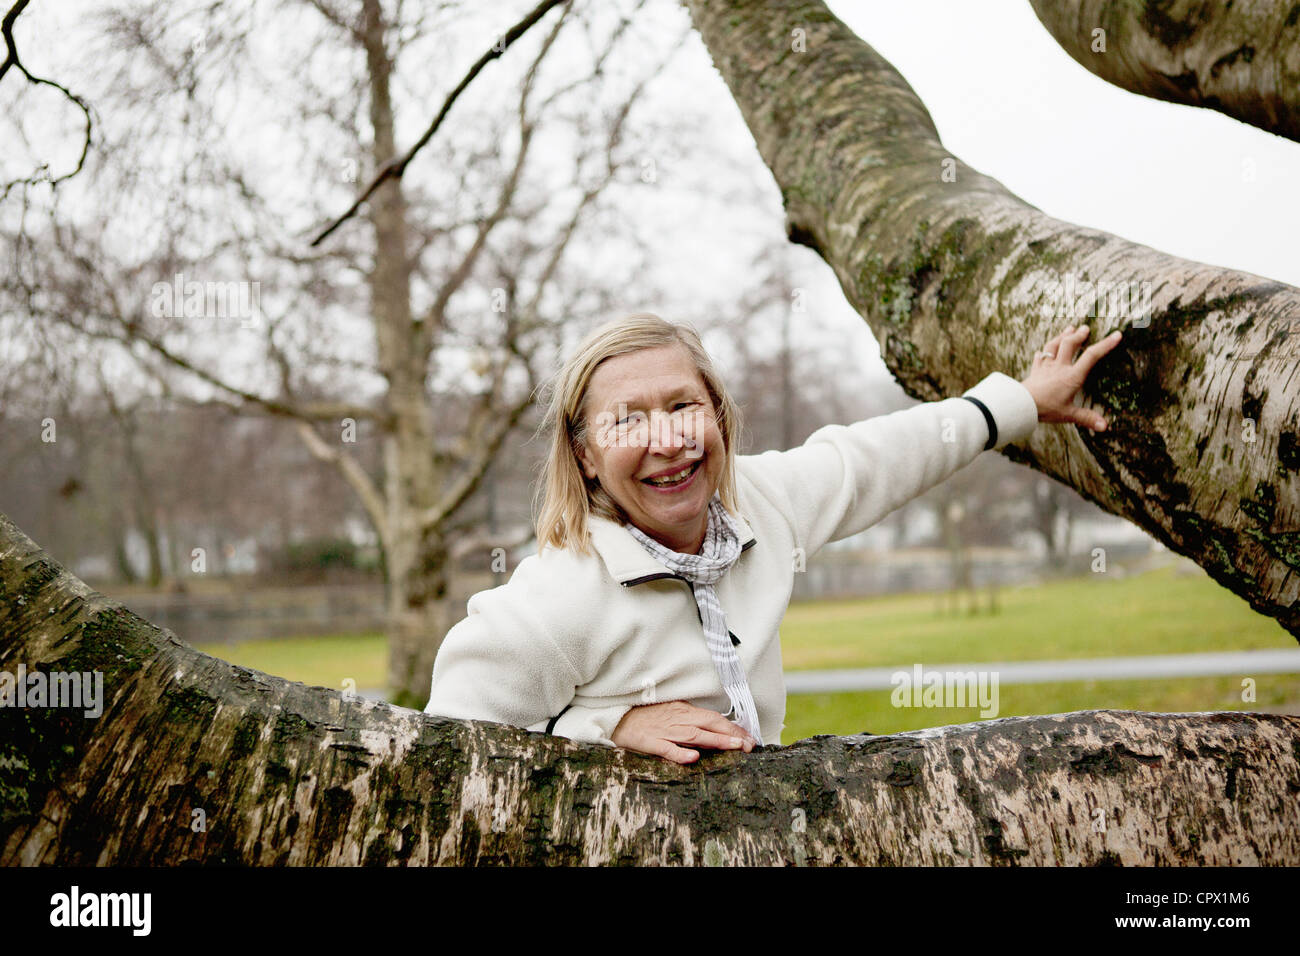 Senior woman leaning against tree, smiling Stock Photo